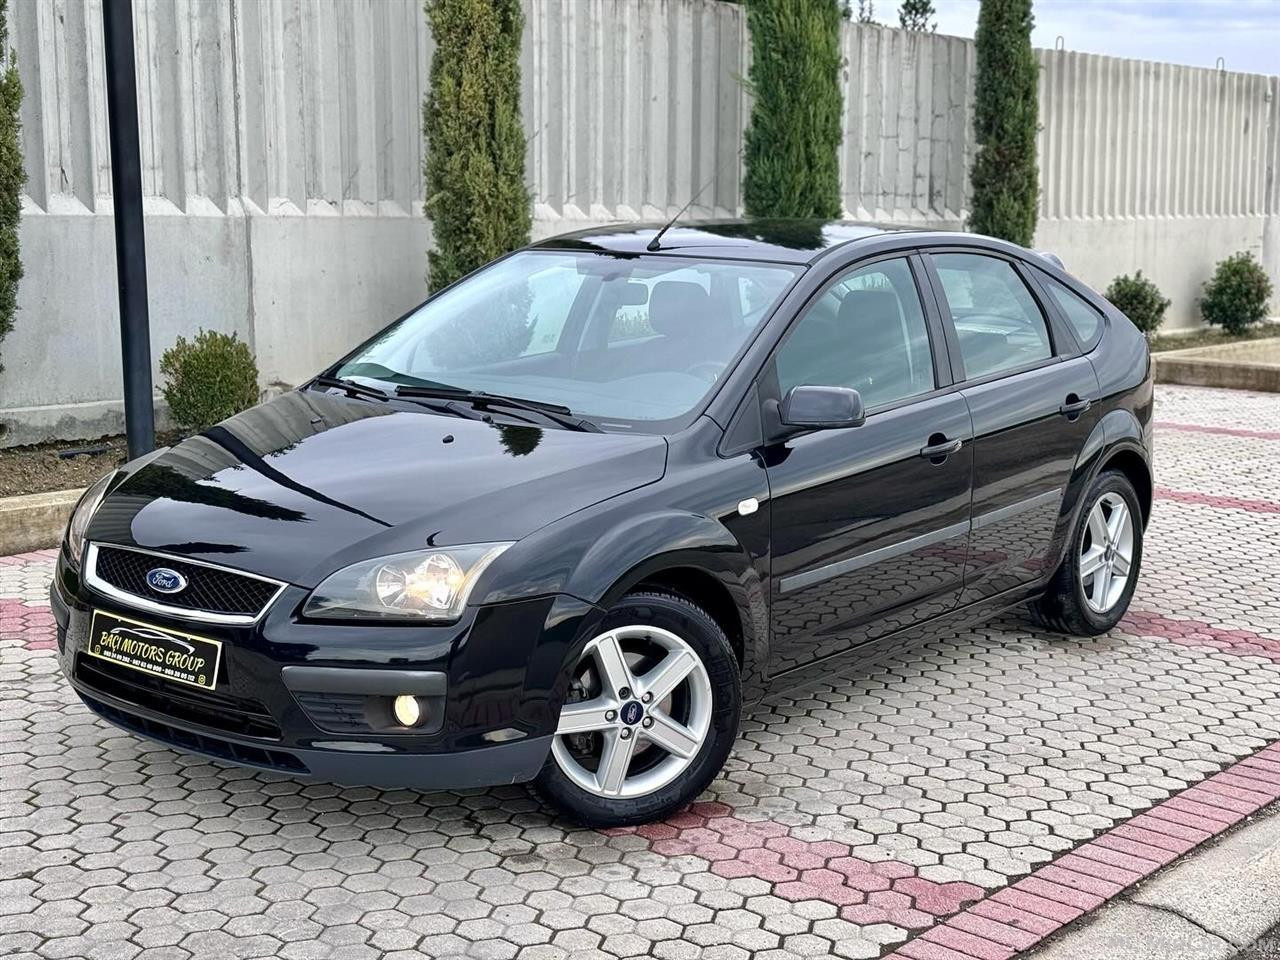 Ford Focus 1.6nafte 2007 